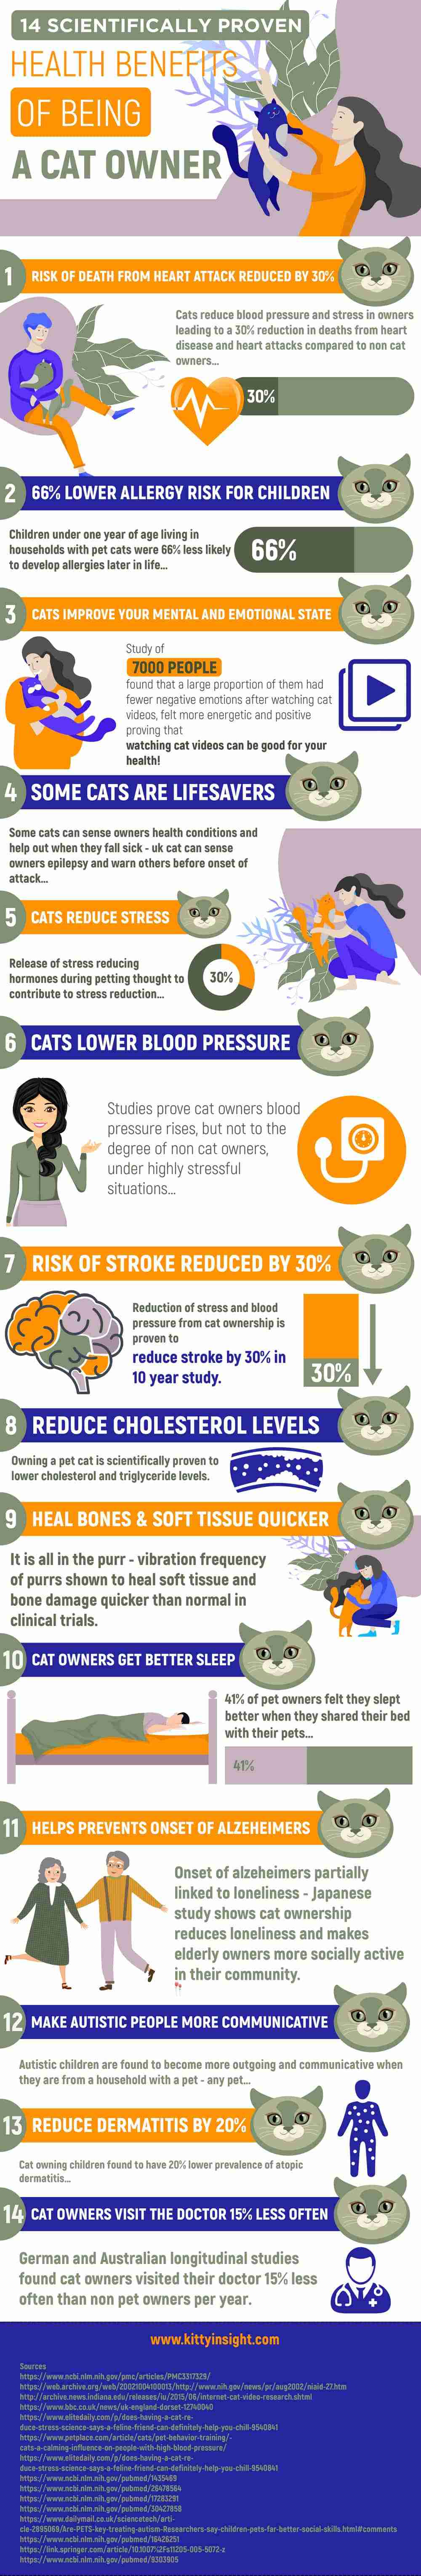 a graphic showing 14 benefits of cat ownership on human health